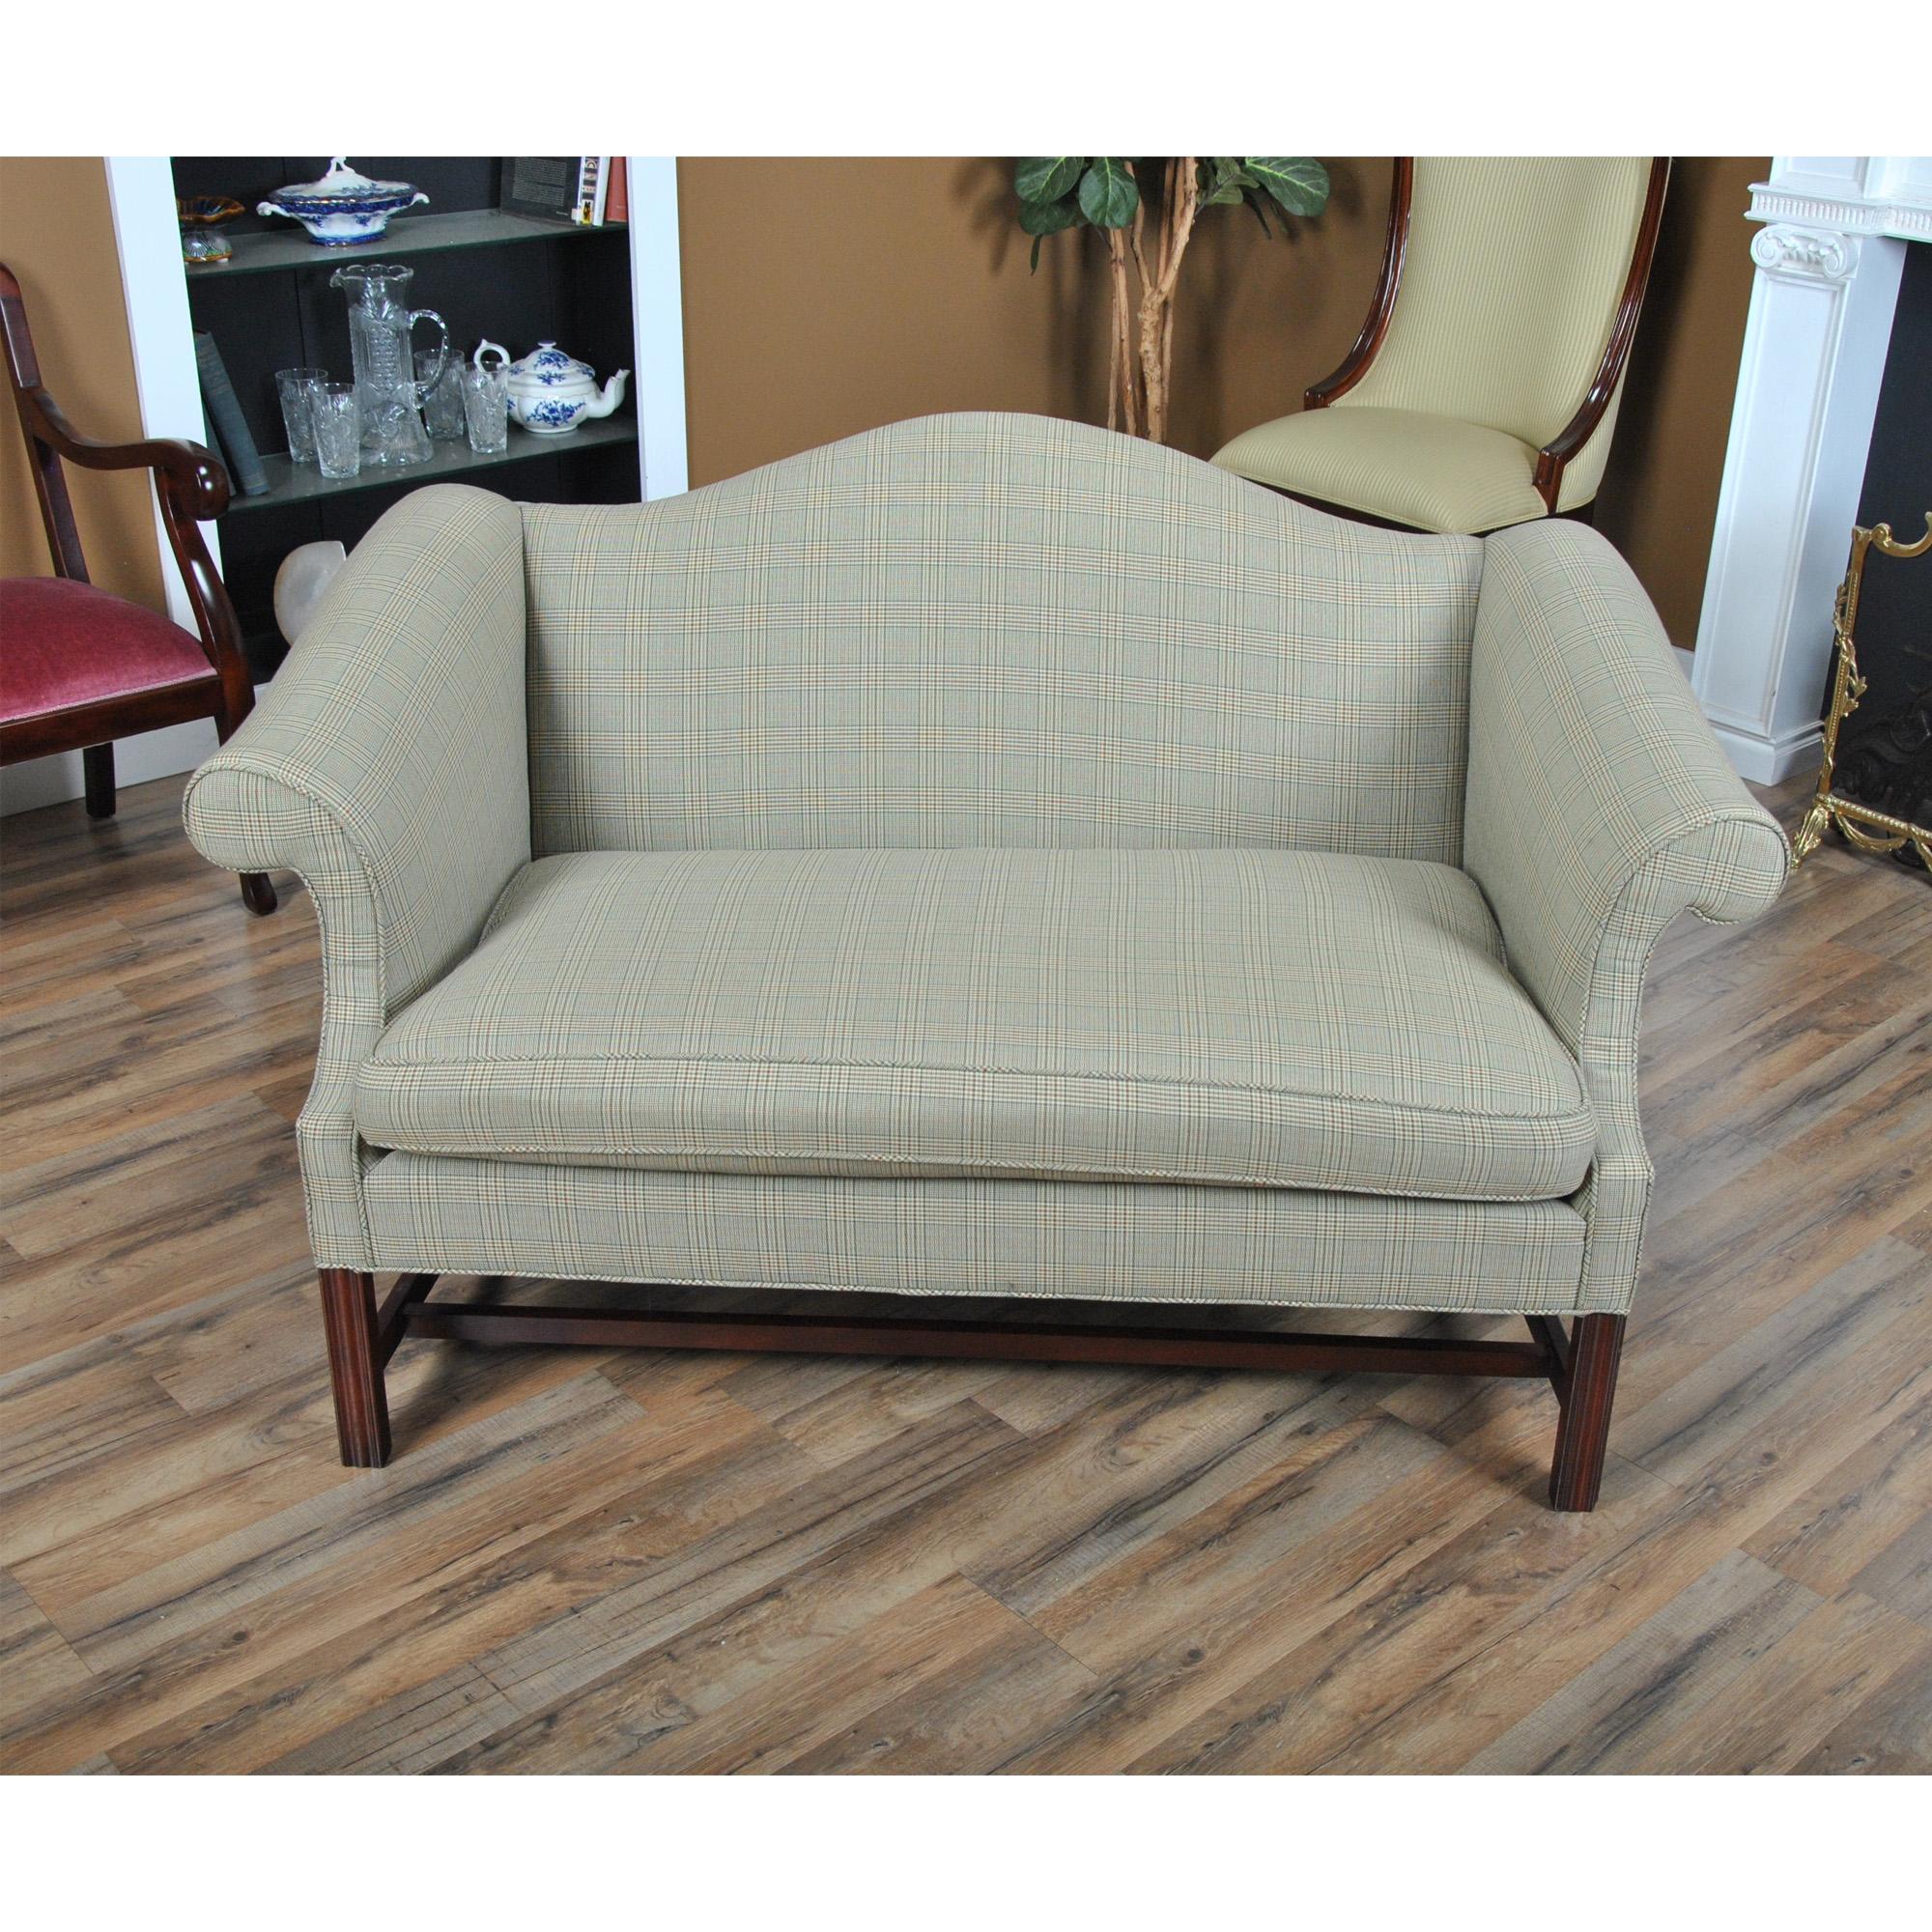 This Vintage Southwood Loveseat is impressive with it’s boldly colored fabric. Superbly crafted in the USA using finest quality materials solid mahogany for the frame and such as duck down and duck feathers for the cushion, this Loveseat has a great